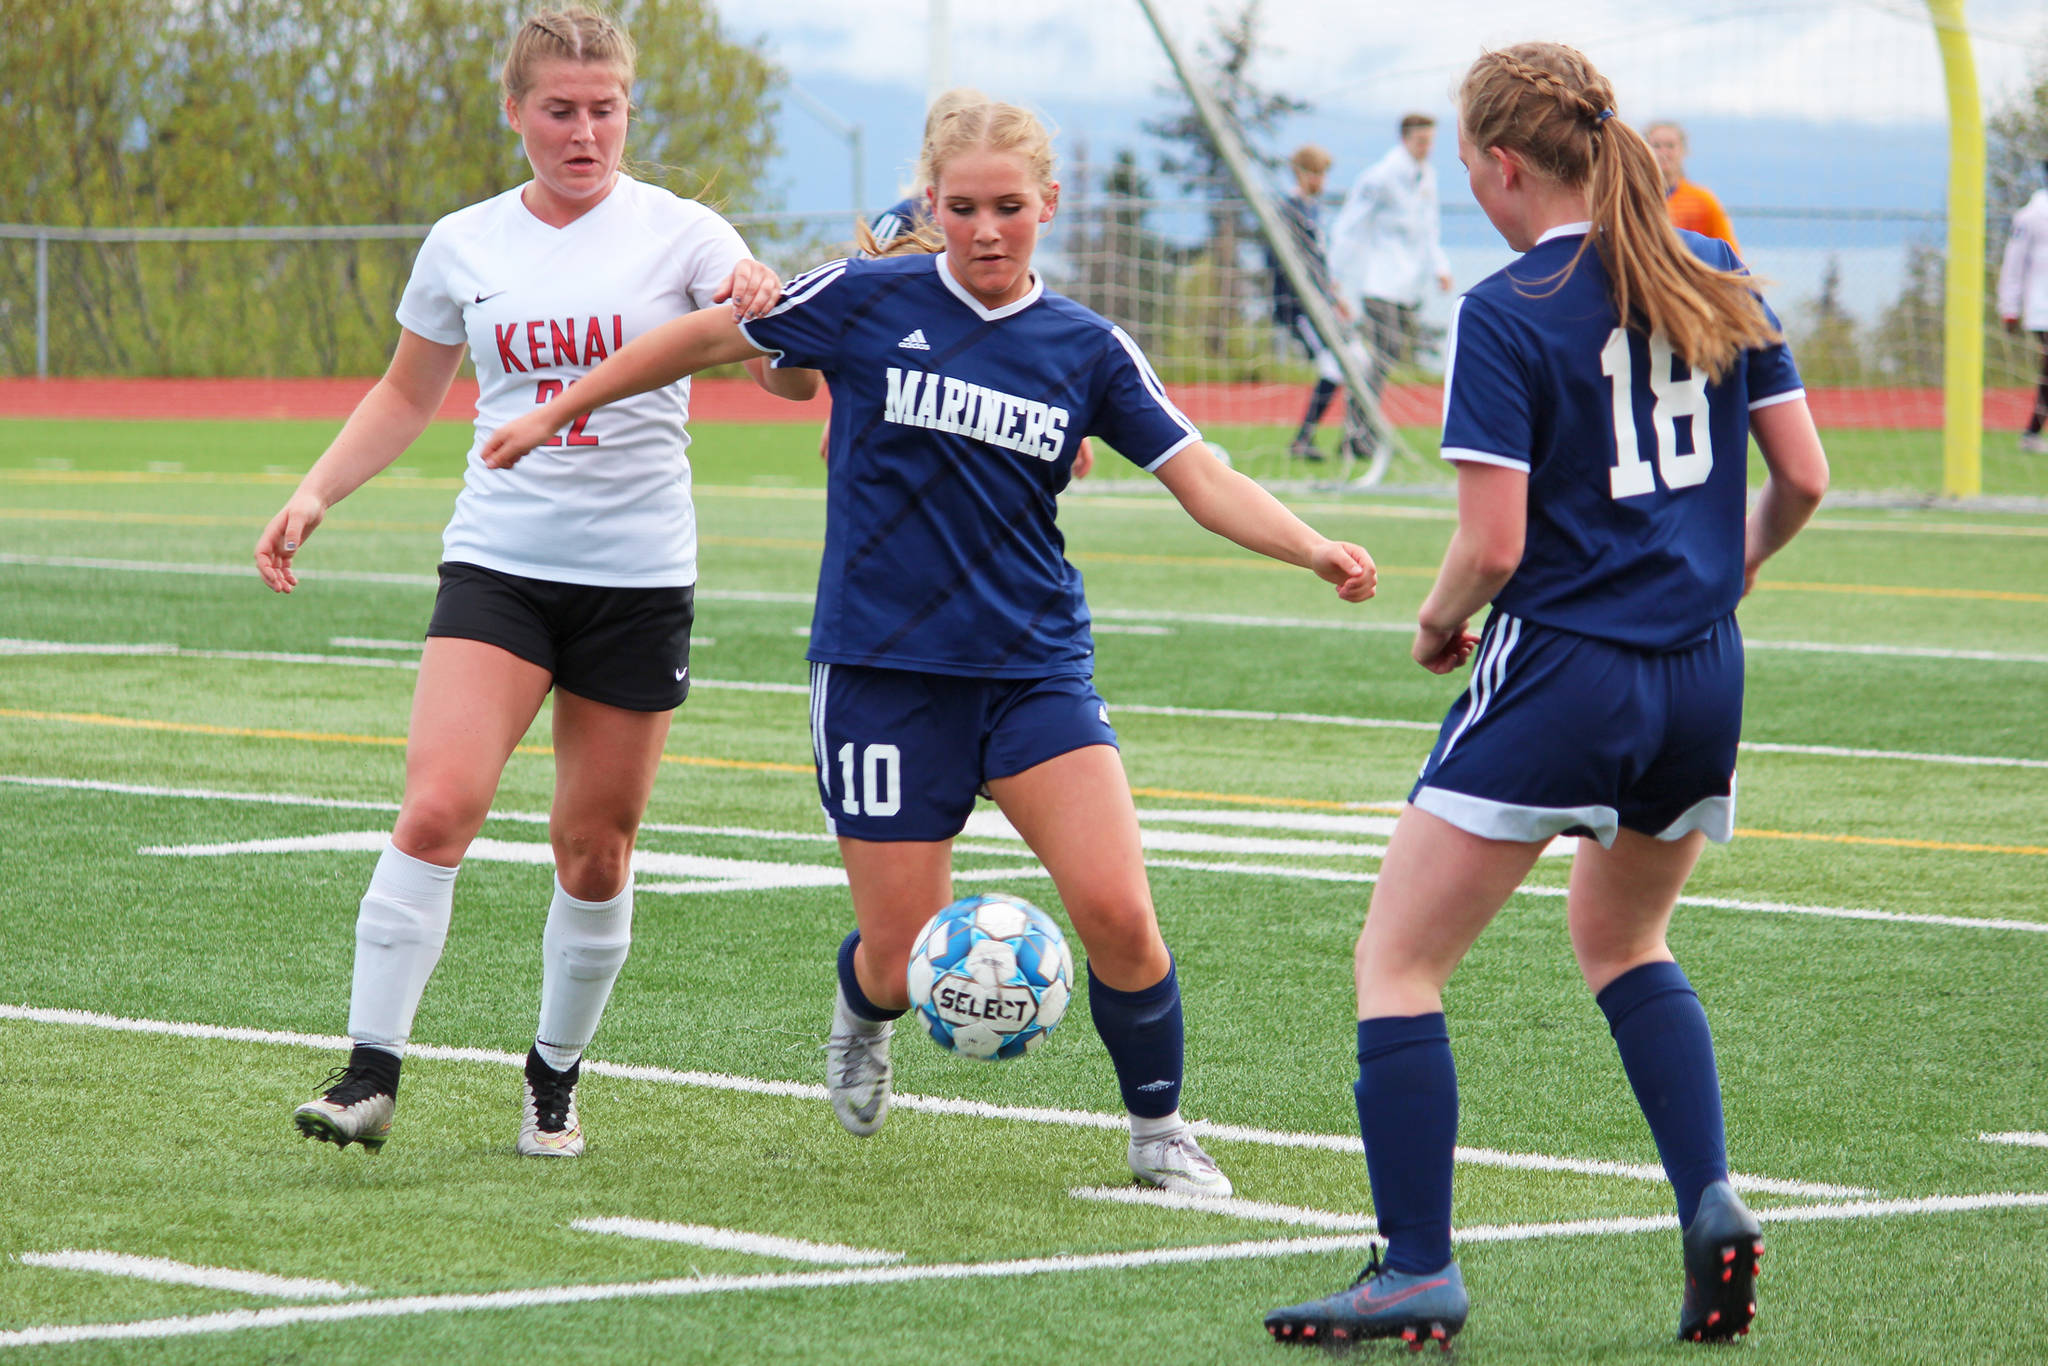 Homer’s Paige Jones (center) passes off the ball to teammate Zoe Stonorov (No. 18) under pressure from Kenai’s Olivia Brewer during the semifinal game of the Peninsula Conference Soccer Tournament on Friday, May 17, 2019 at Homer High School in Homer, Alaska. (Photo by Megan Pacer/Homer News)